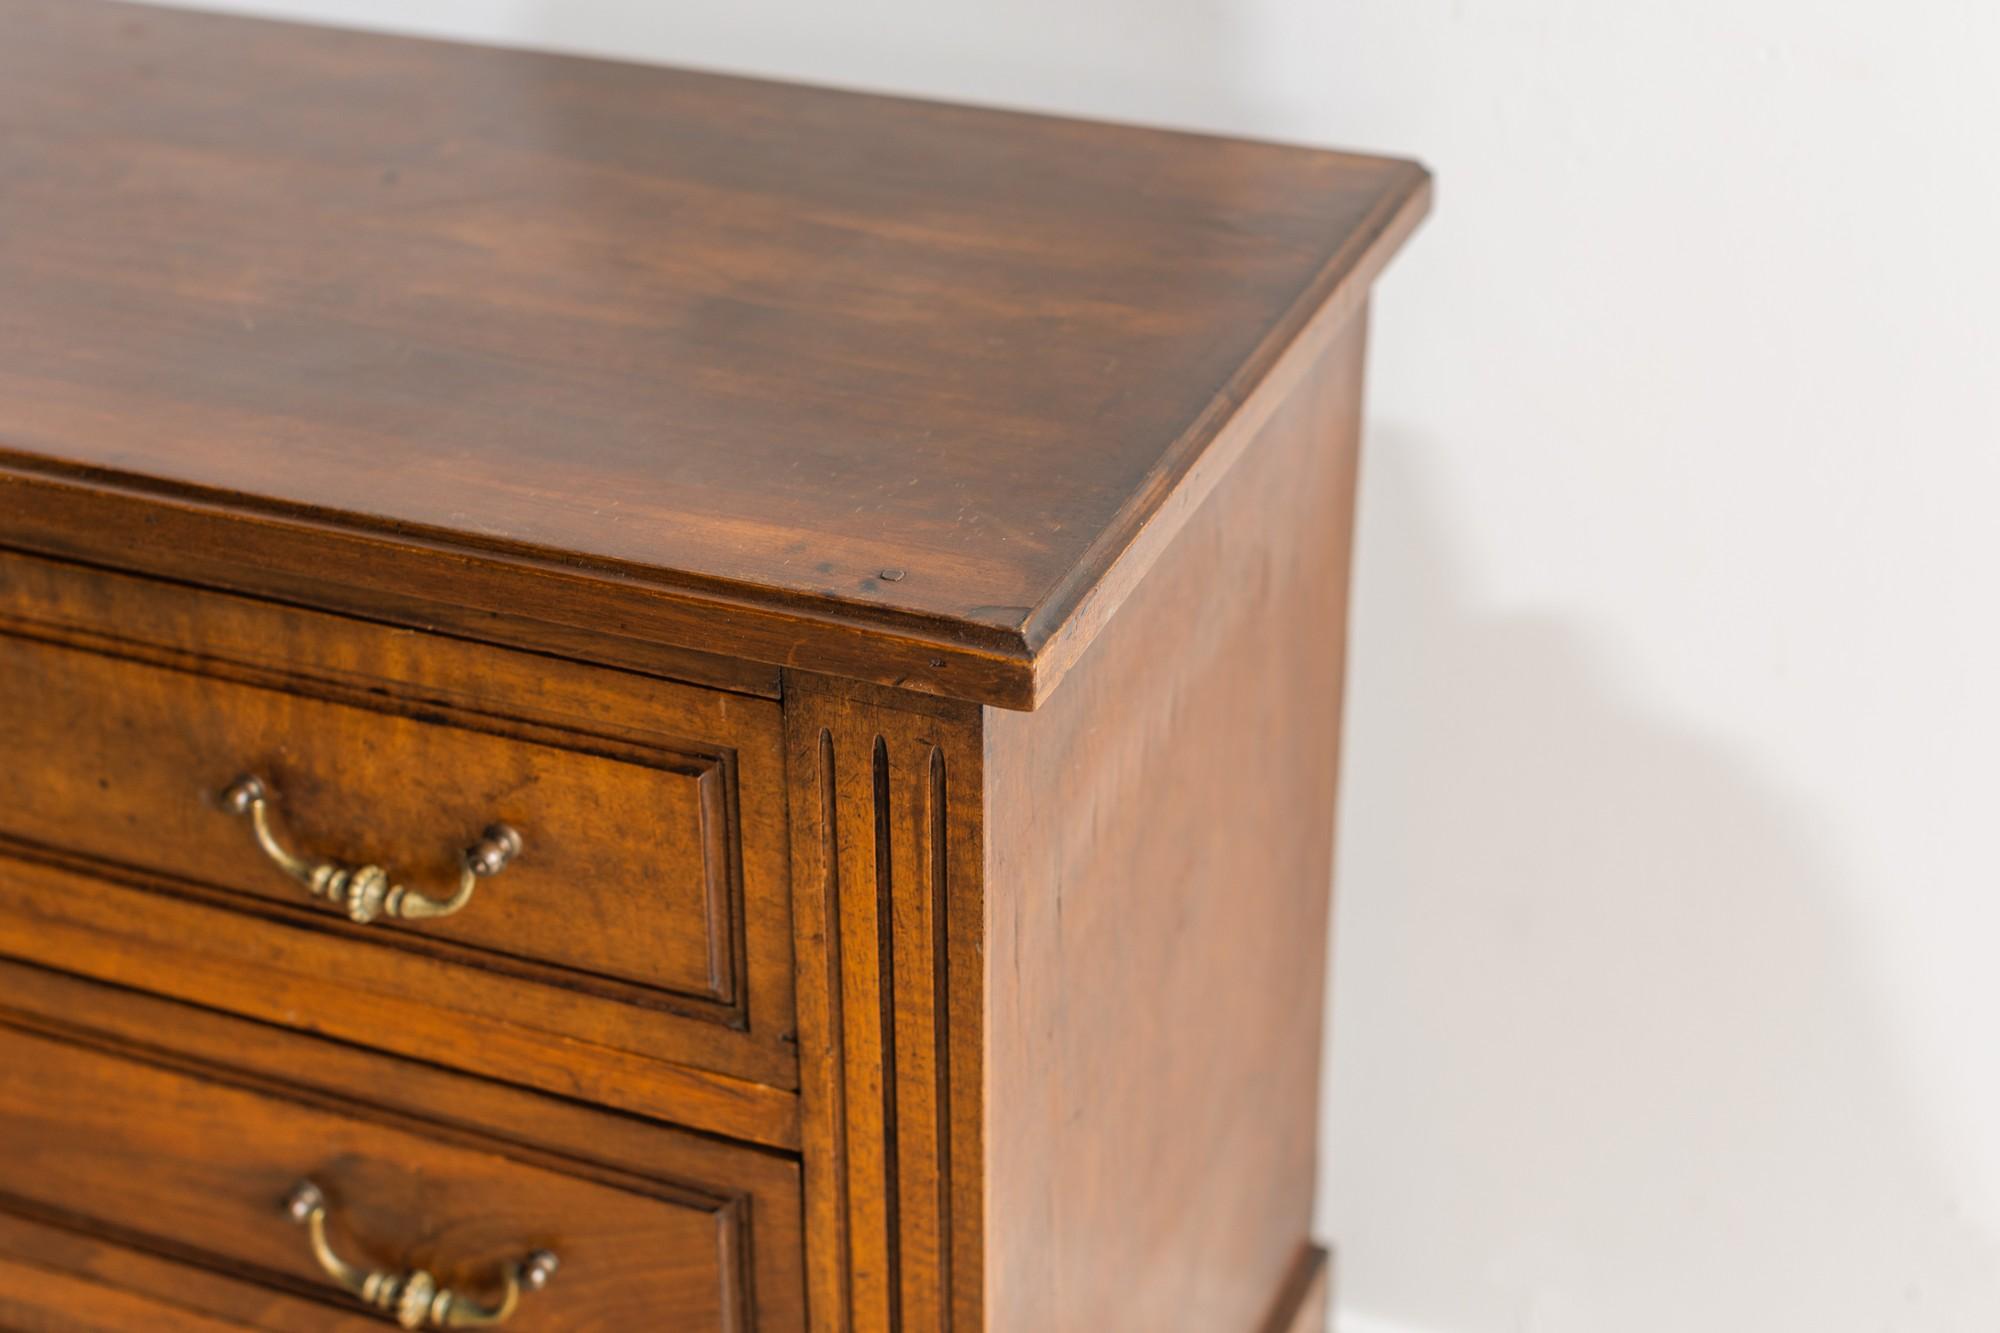 French Louis XVI Chest of Drawers